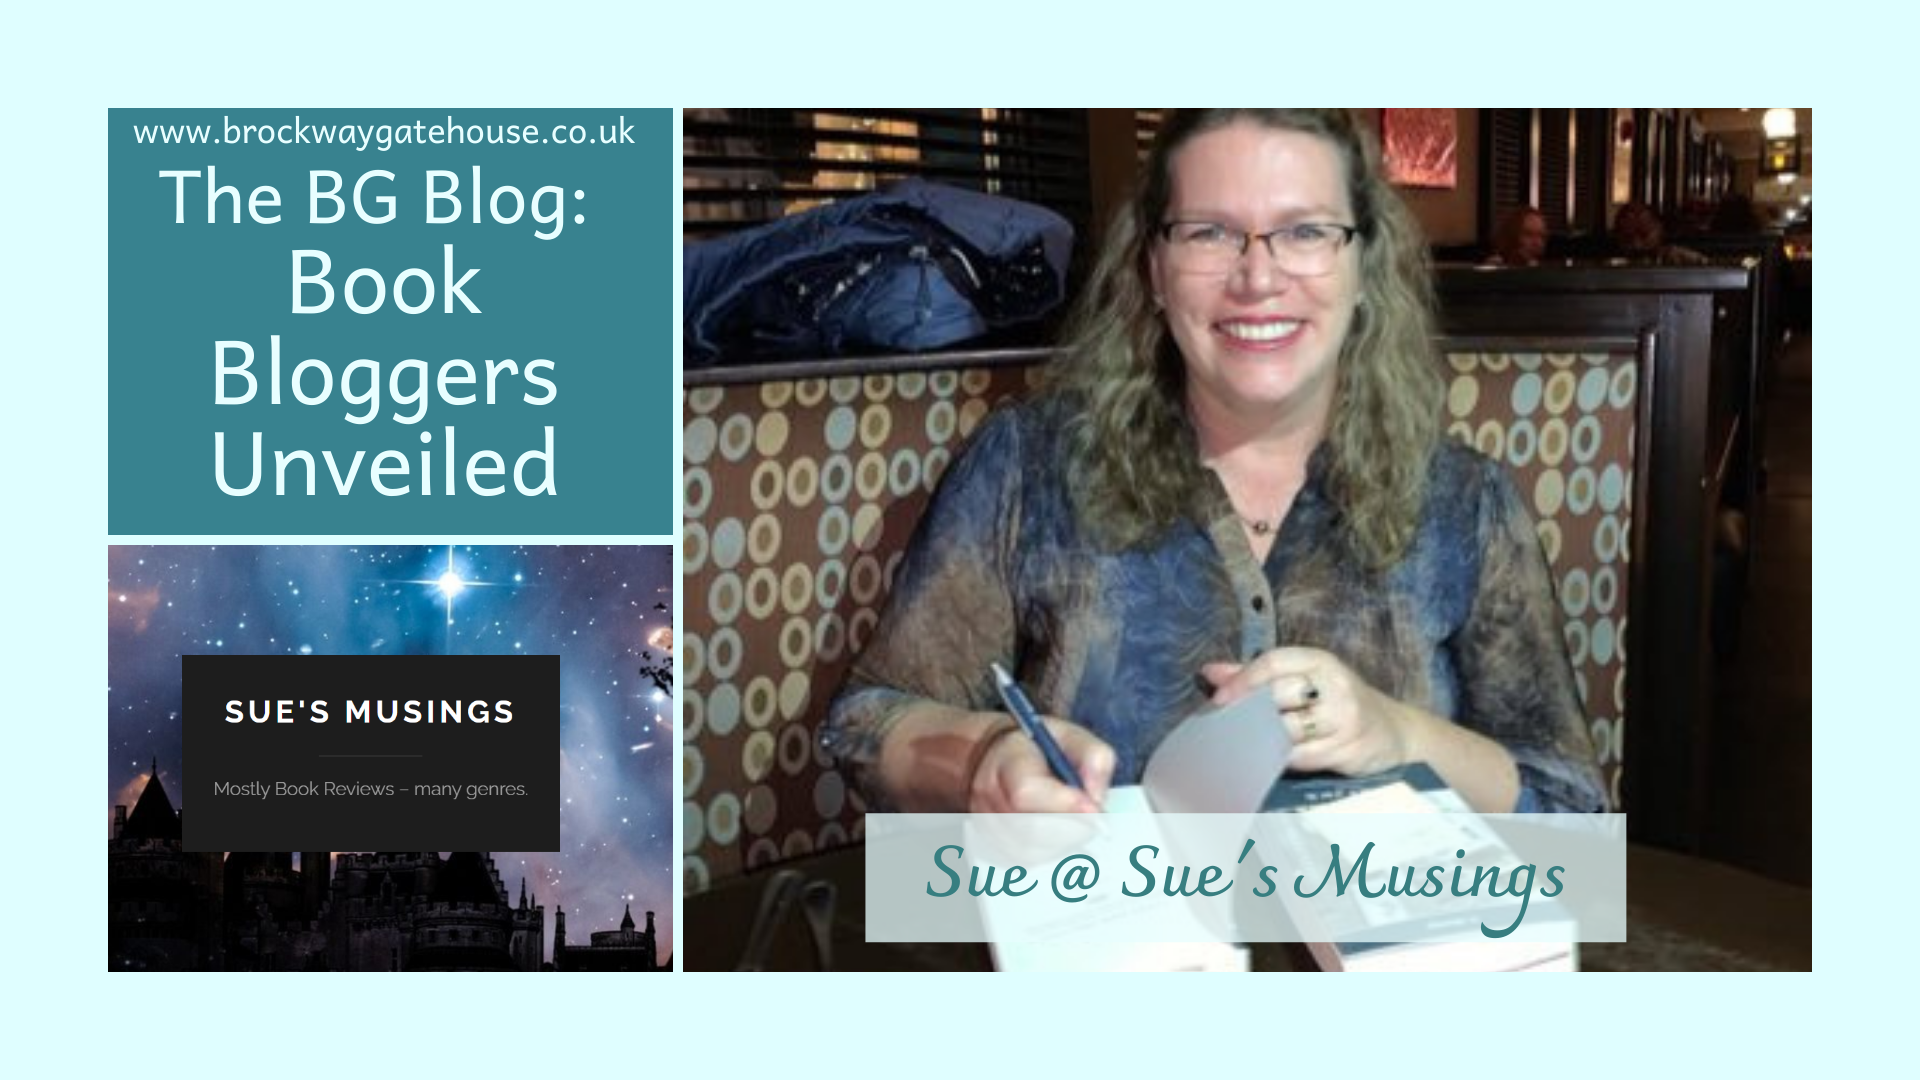 Book Bloggers Unveiled – Meet Sue @ Sue’s Musings